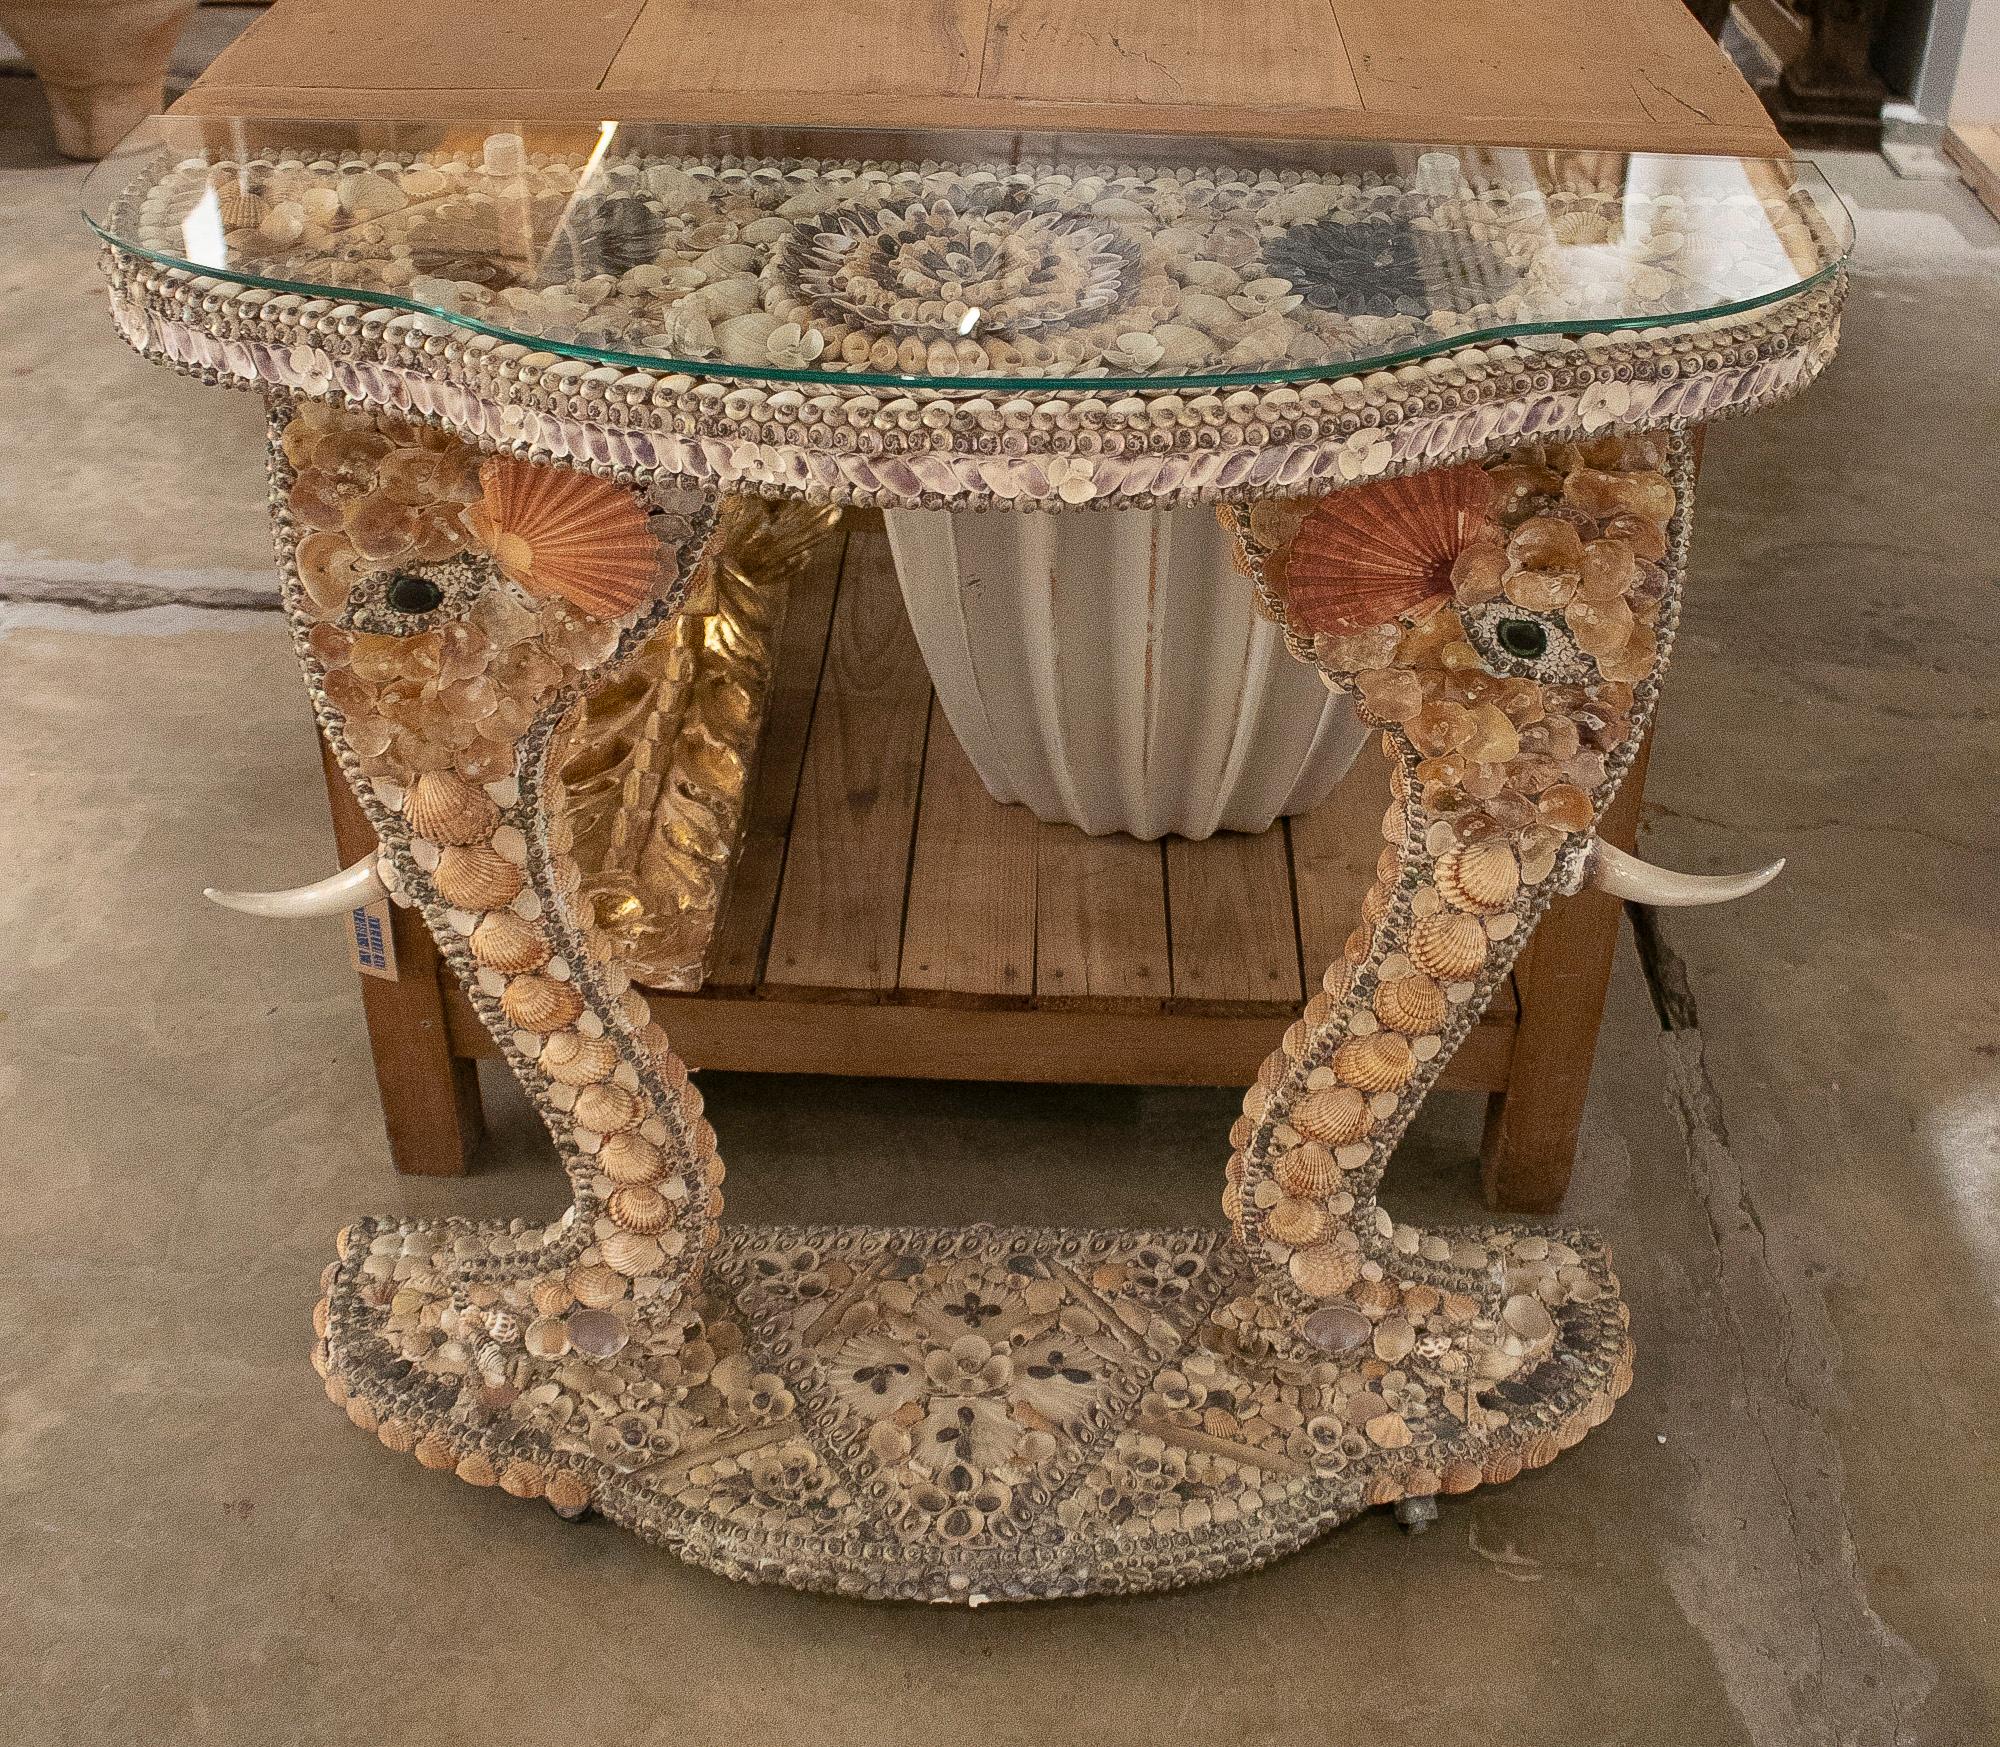 20th Century 1970s French Conch Studded Console Table w/ Elephant Head Feet & Glass Top